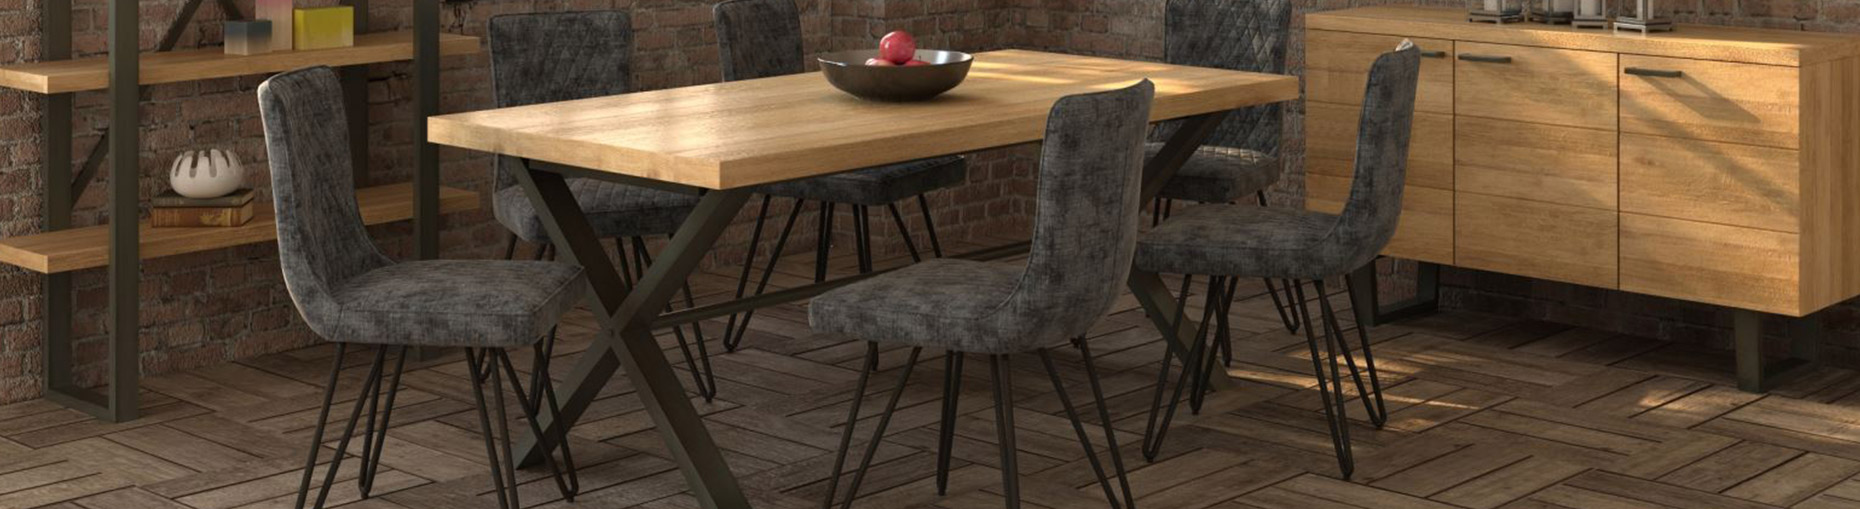 Bourton dining collection at Forrest Furnishing